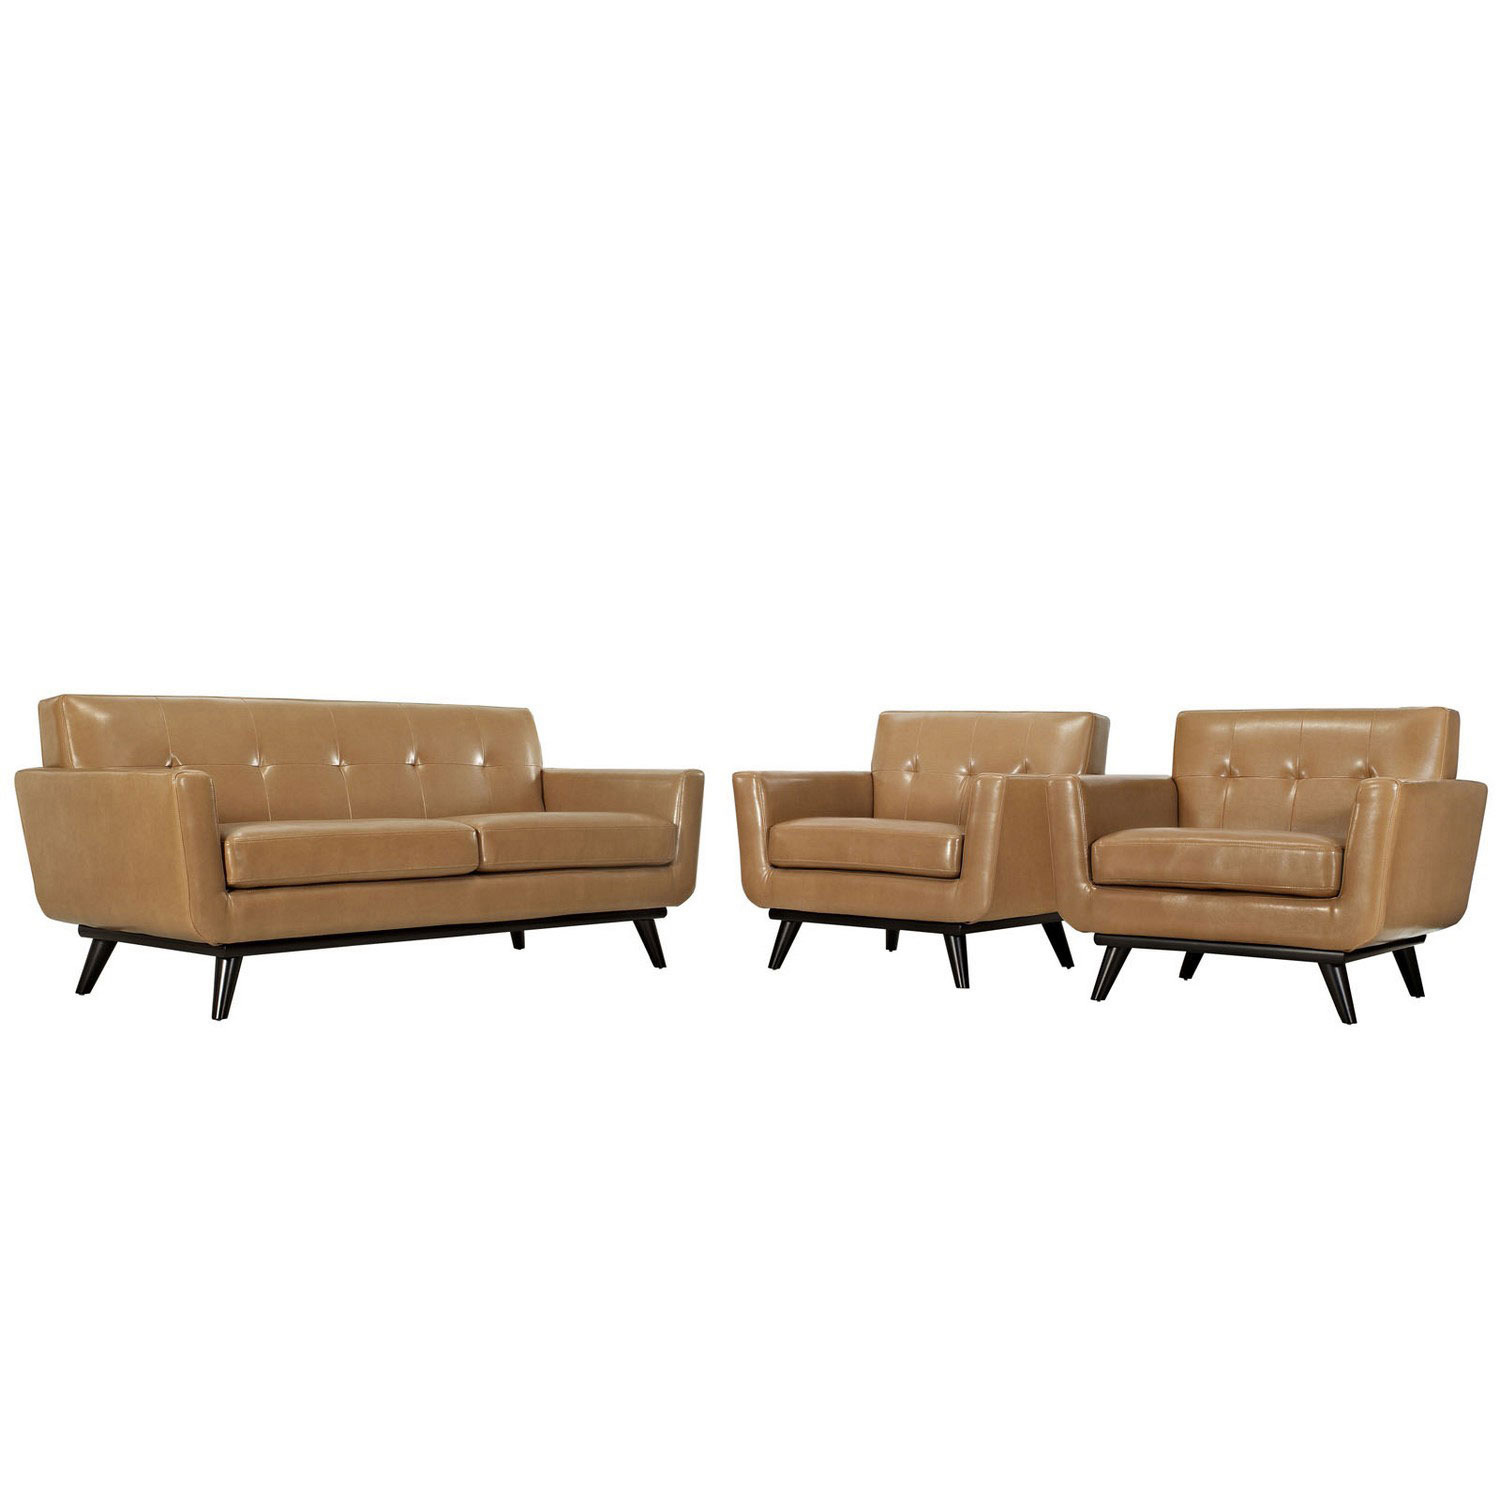 Modway Engage 3 Piece Leather Living Room Set - Tan